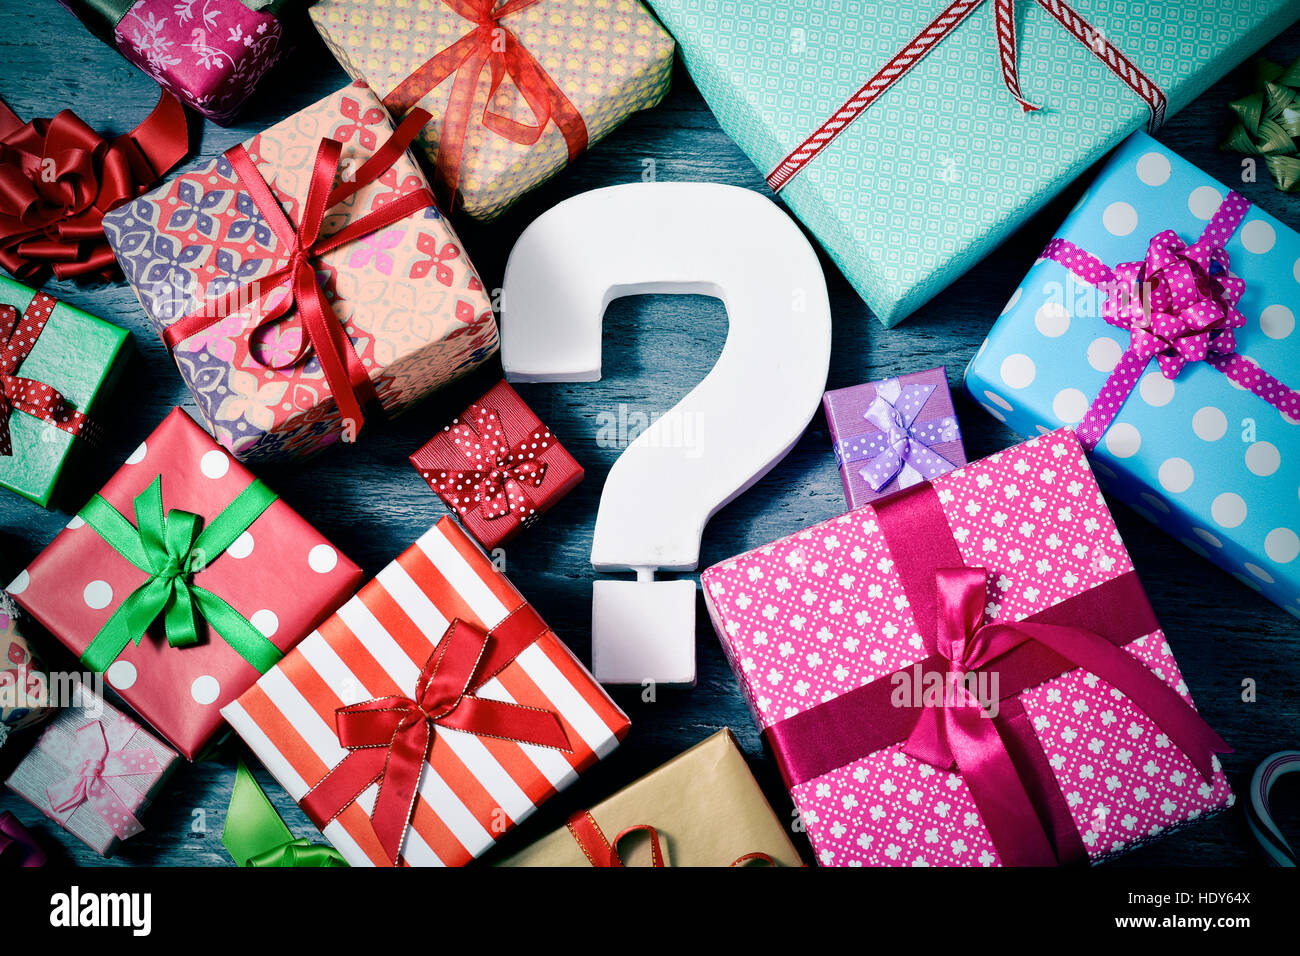 high-angle shot of many gifts wrapped in nice papers and tied with ribbons of different colors and a white three-dimensional question tag in the cente Stock Photo